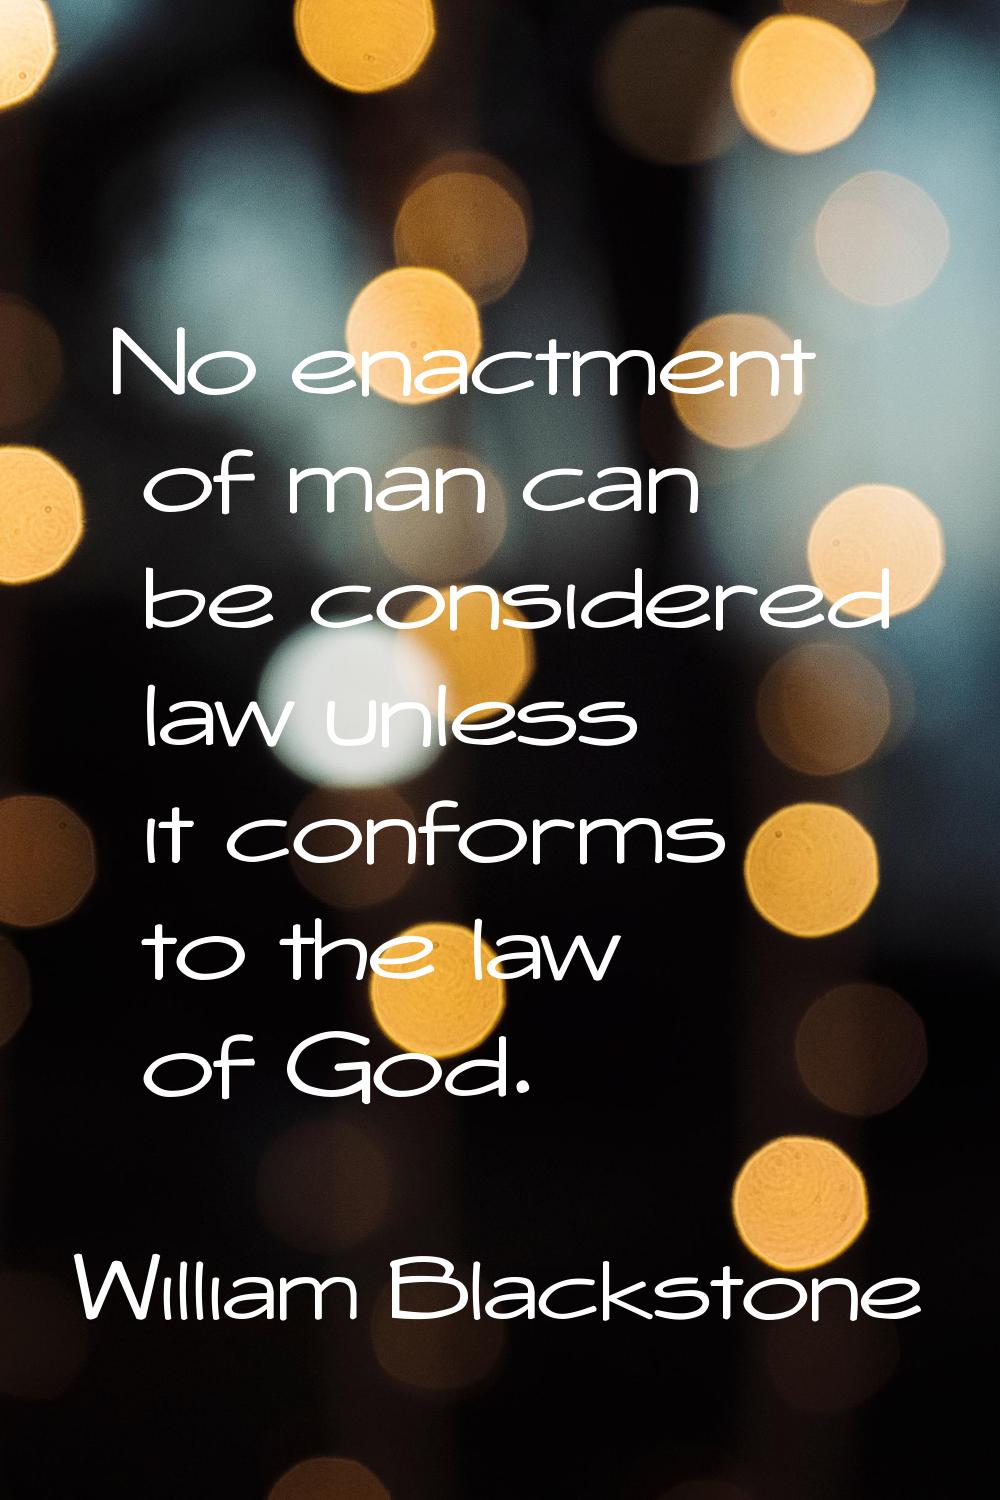 No enactment of man can be considered law unless it conforms to the law of God.